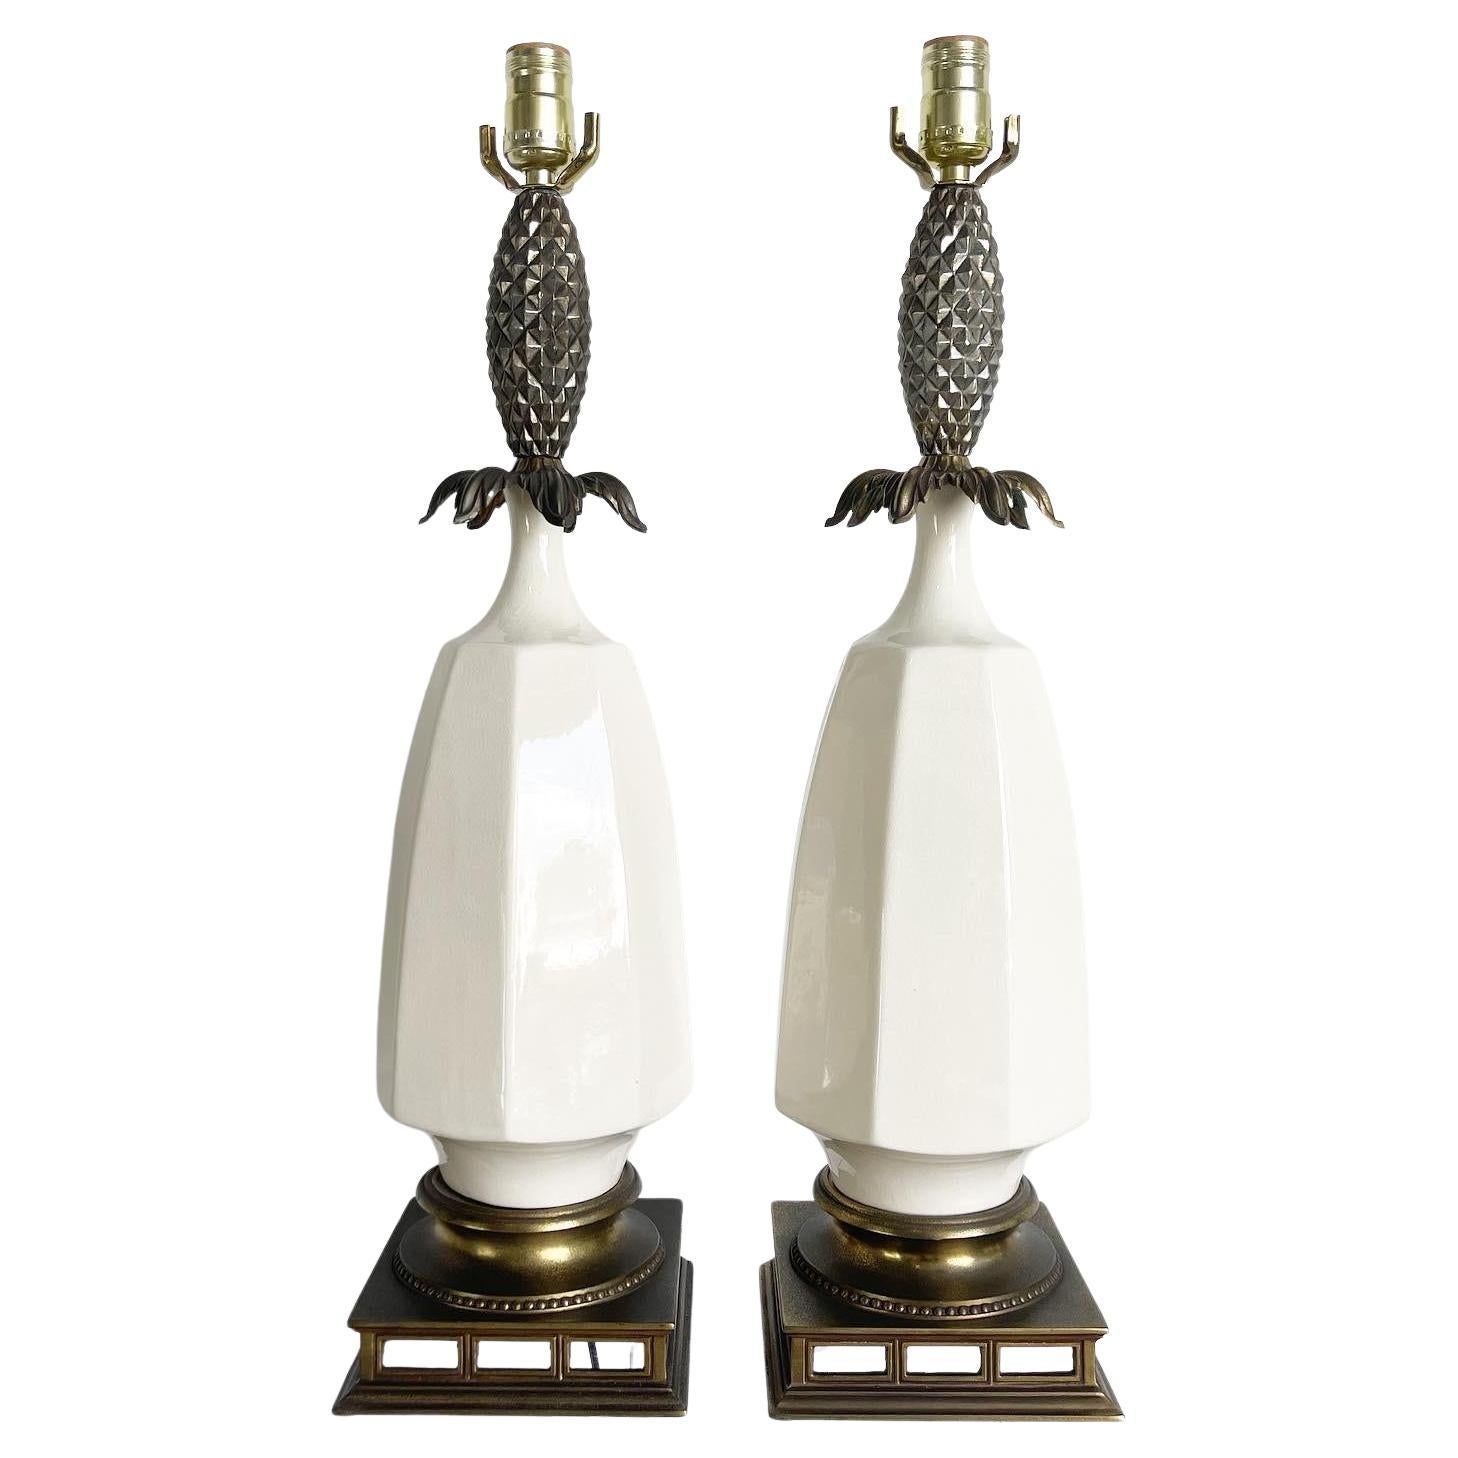 Hollywood Regency Creams Ceramic and Brass Pineapple Table Lamps - a Pair